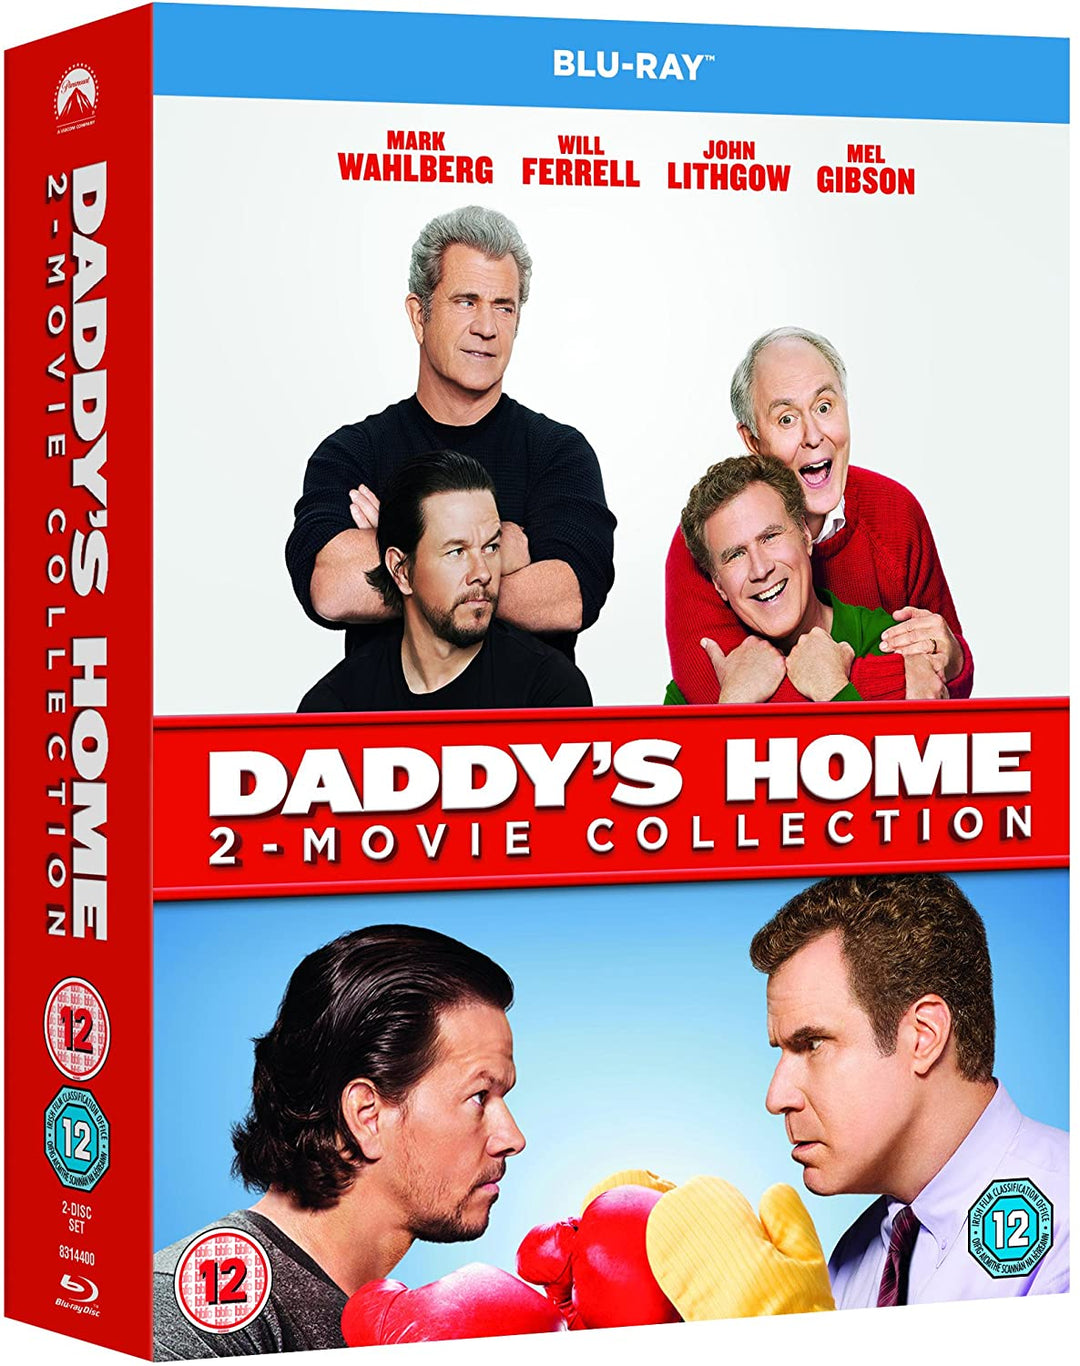 Daddy's Home: 2-Movie Collection - Comedy/Family [Blu-Ray]